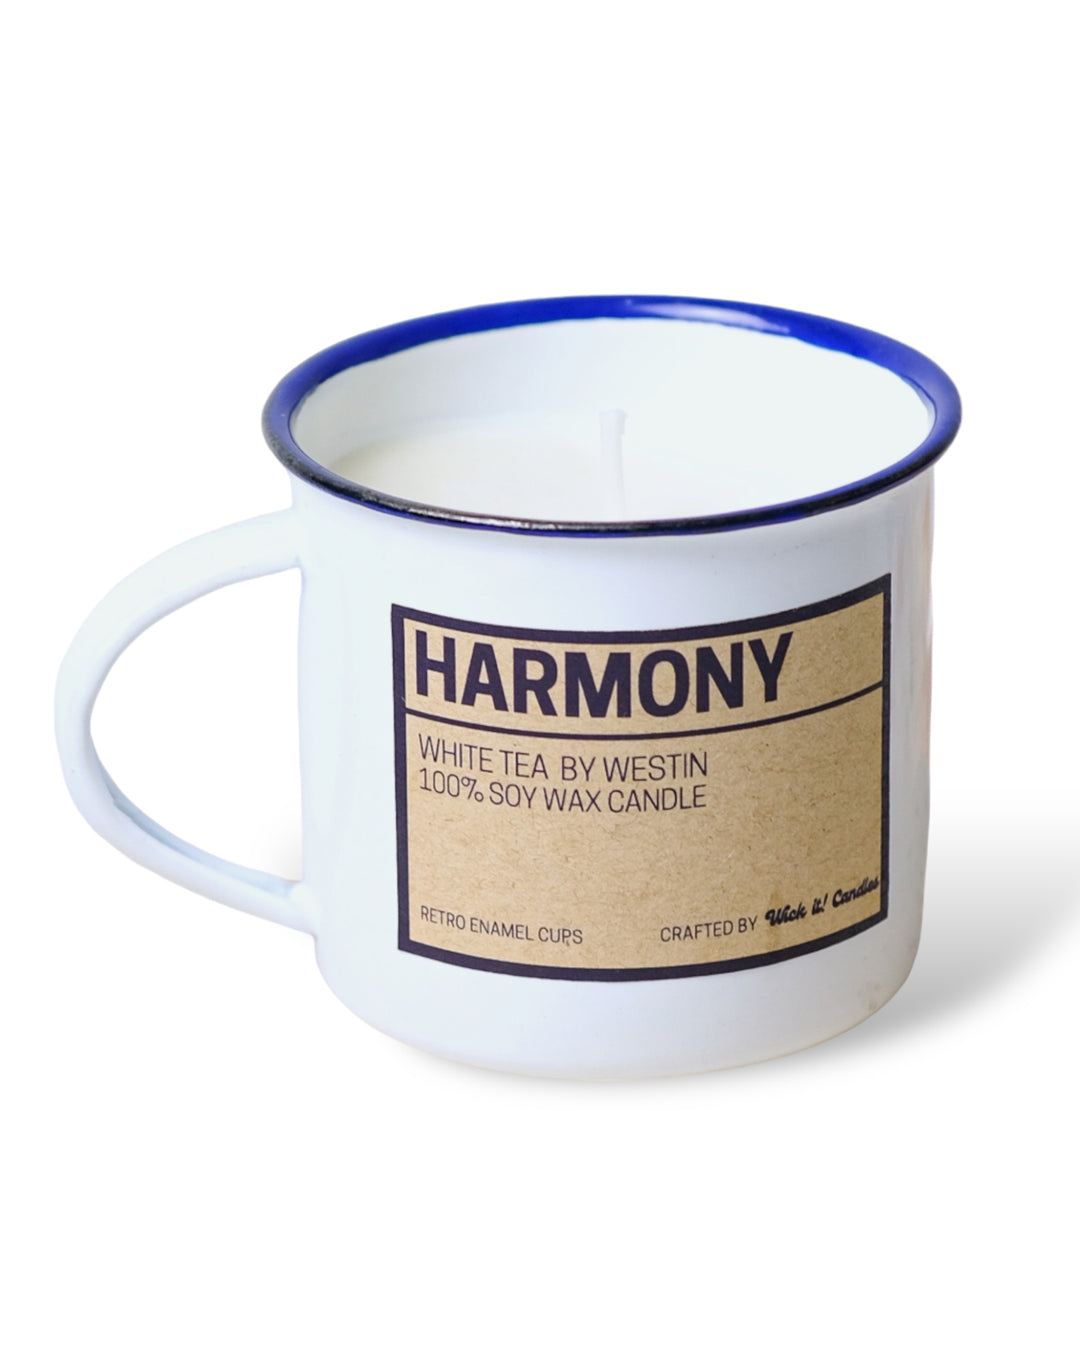 Wick It! Candles Harmony (White Tea by Westin) Scented Candle